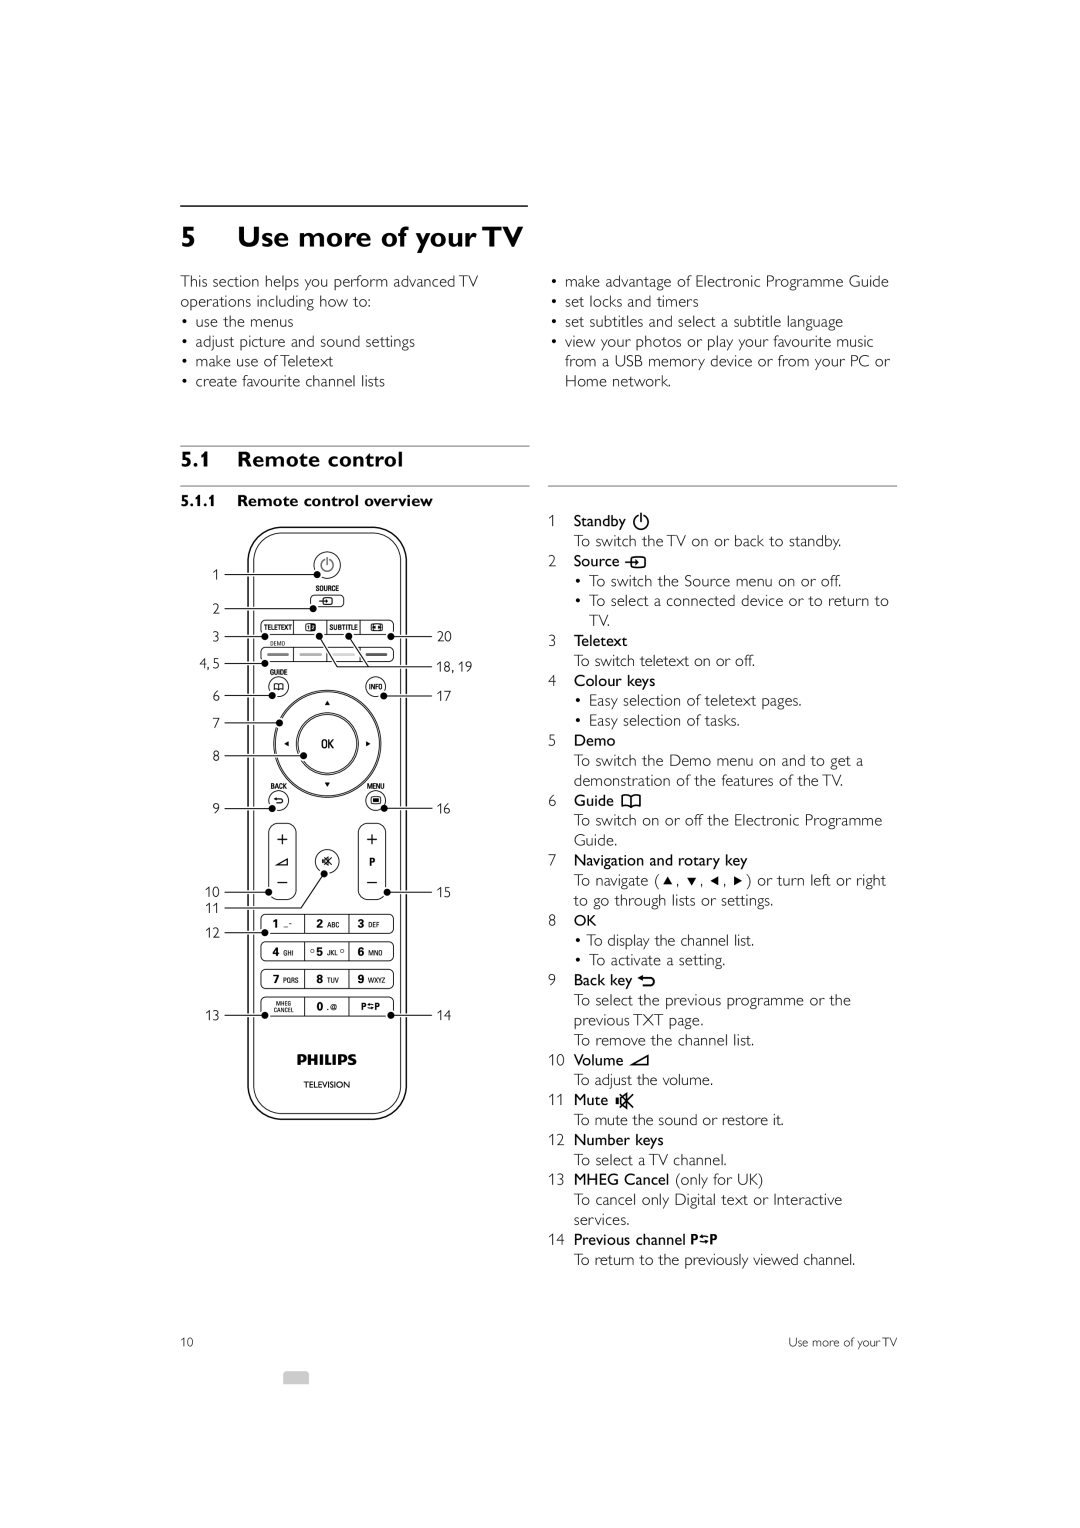 Philips 42PES0001D/H manual Use more of your TV, Remote control overview 